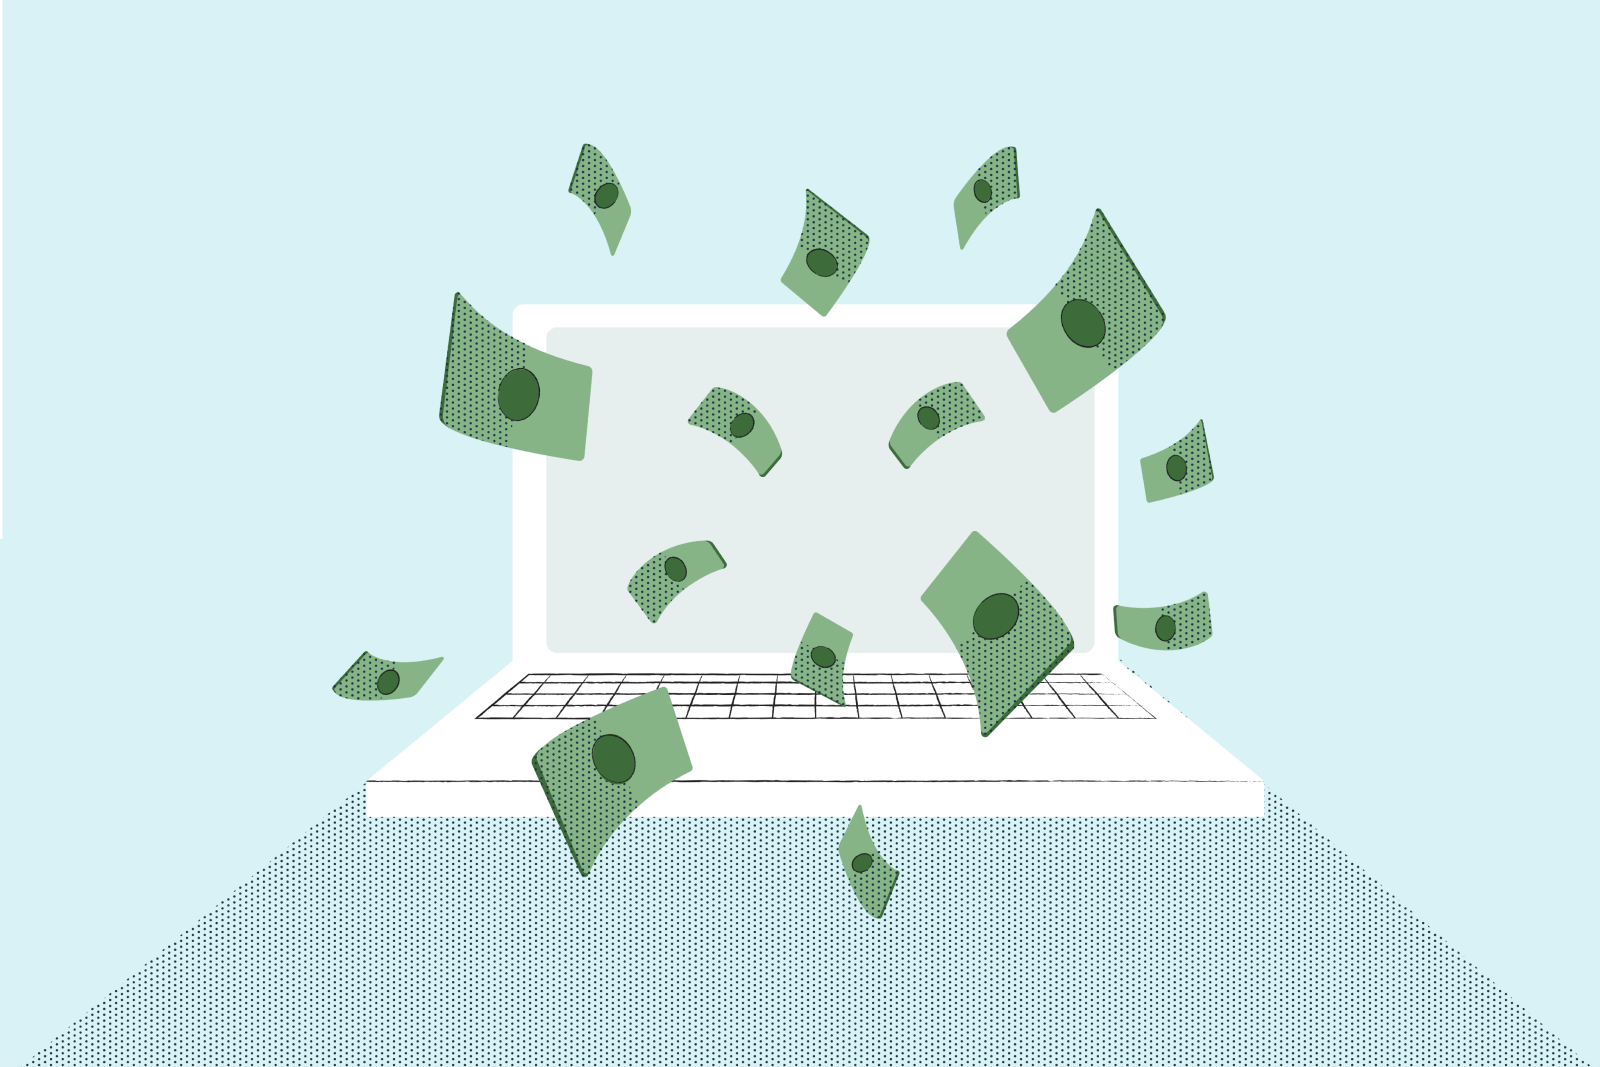 an illustration of dollar bills pouring out of a laptop screen toward the viewer. the computer is white against a light blue background.